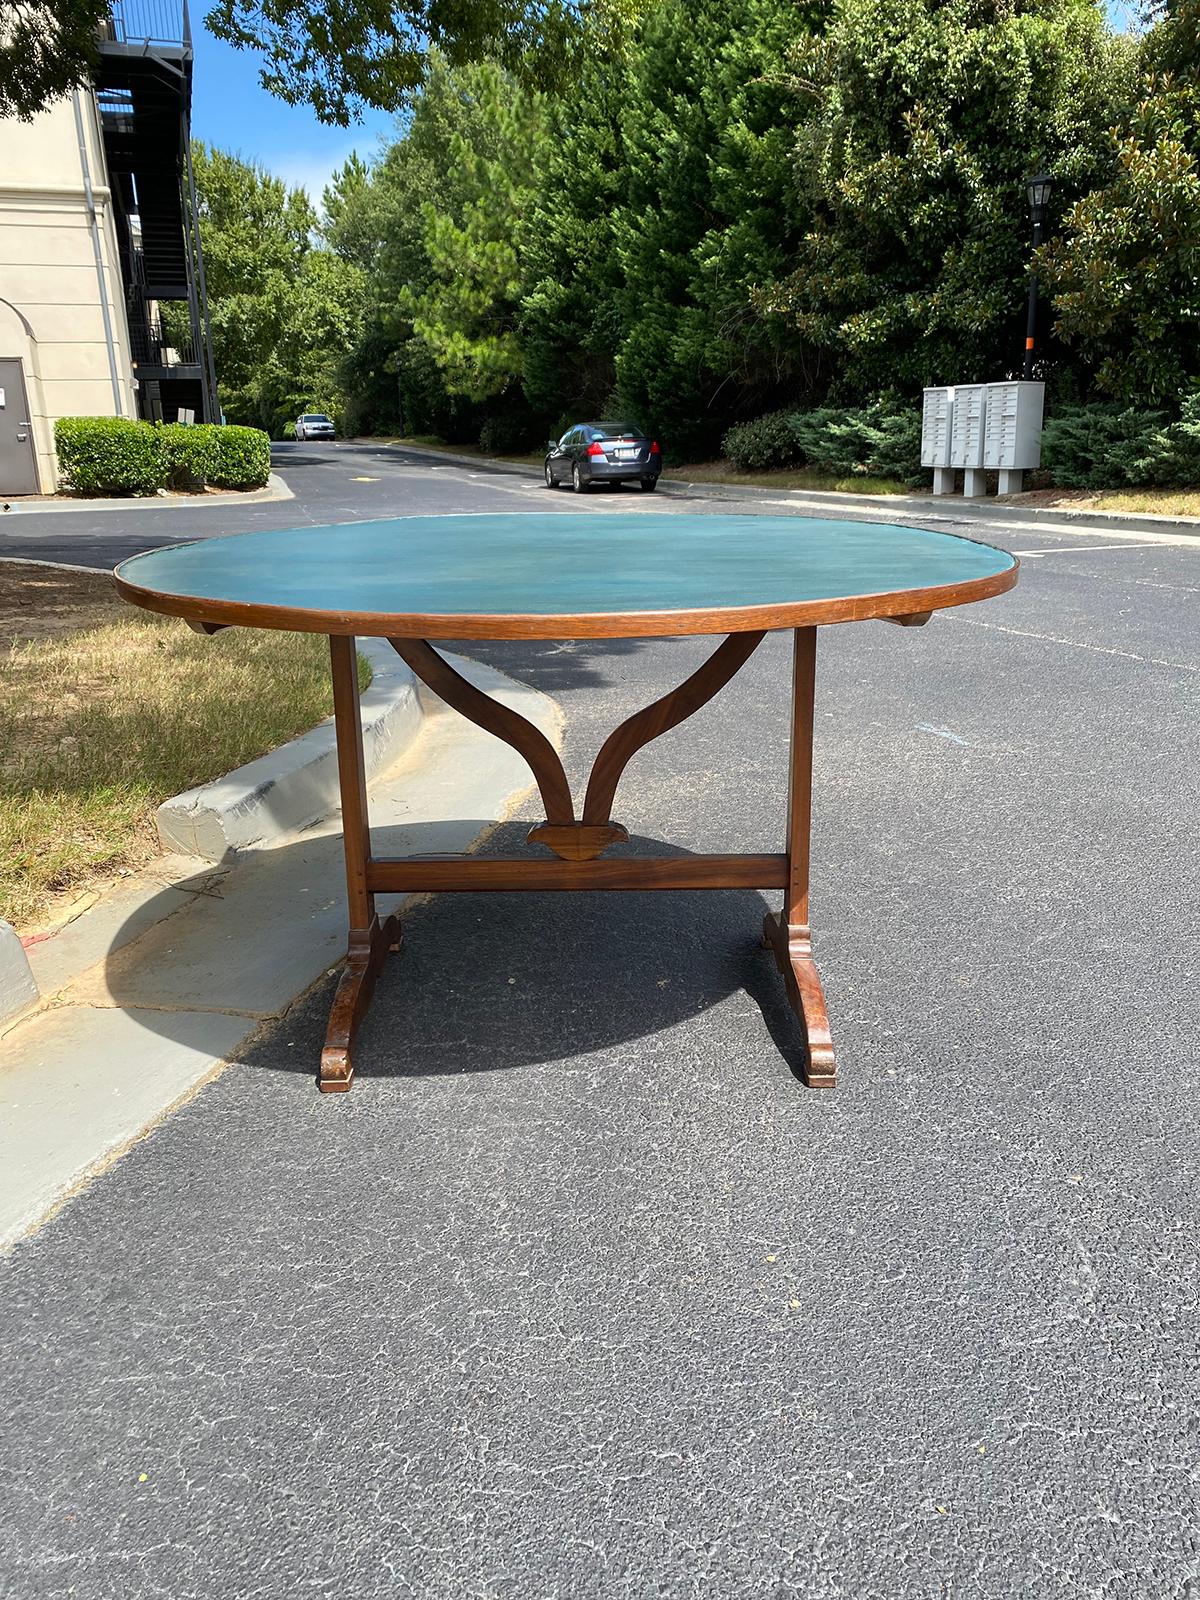 19th century French round tilt-top wine tasting table with custom painted top
Height when tilted up: 51.25